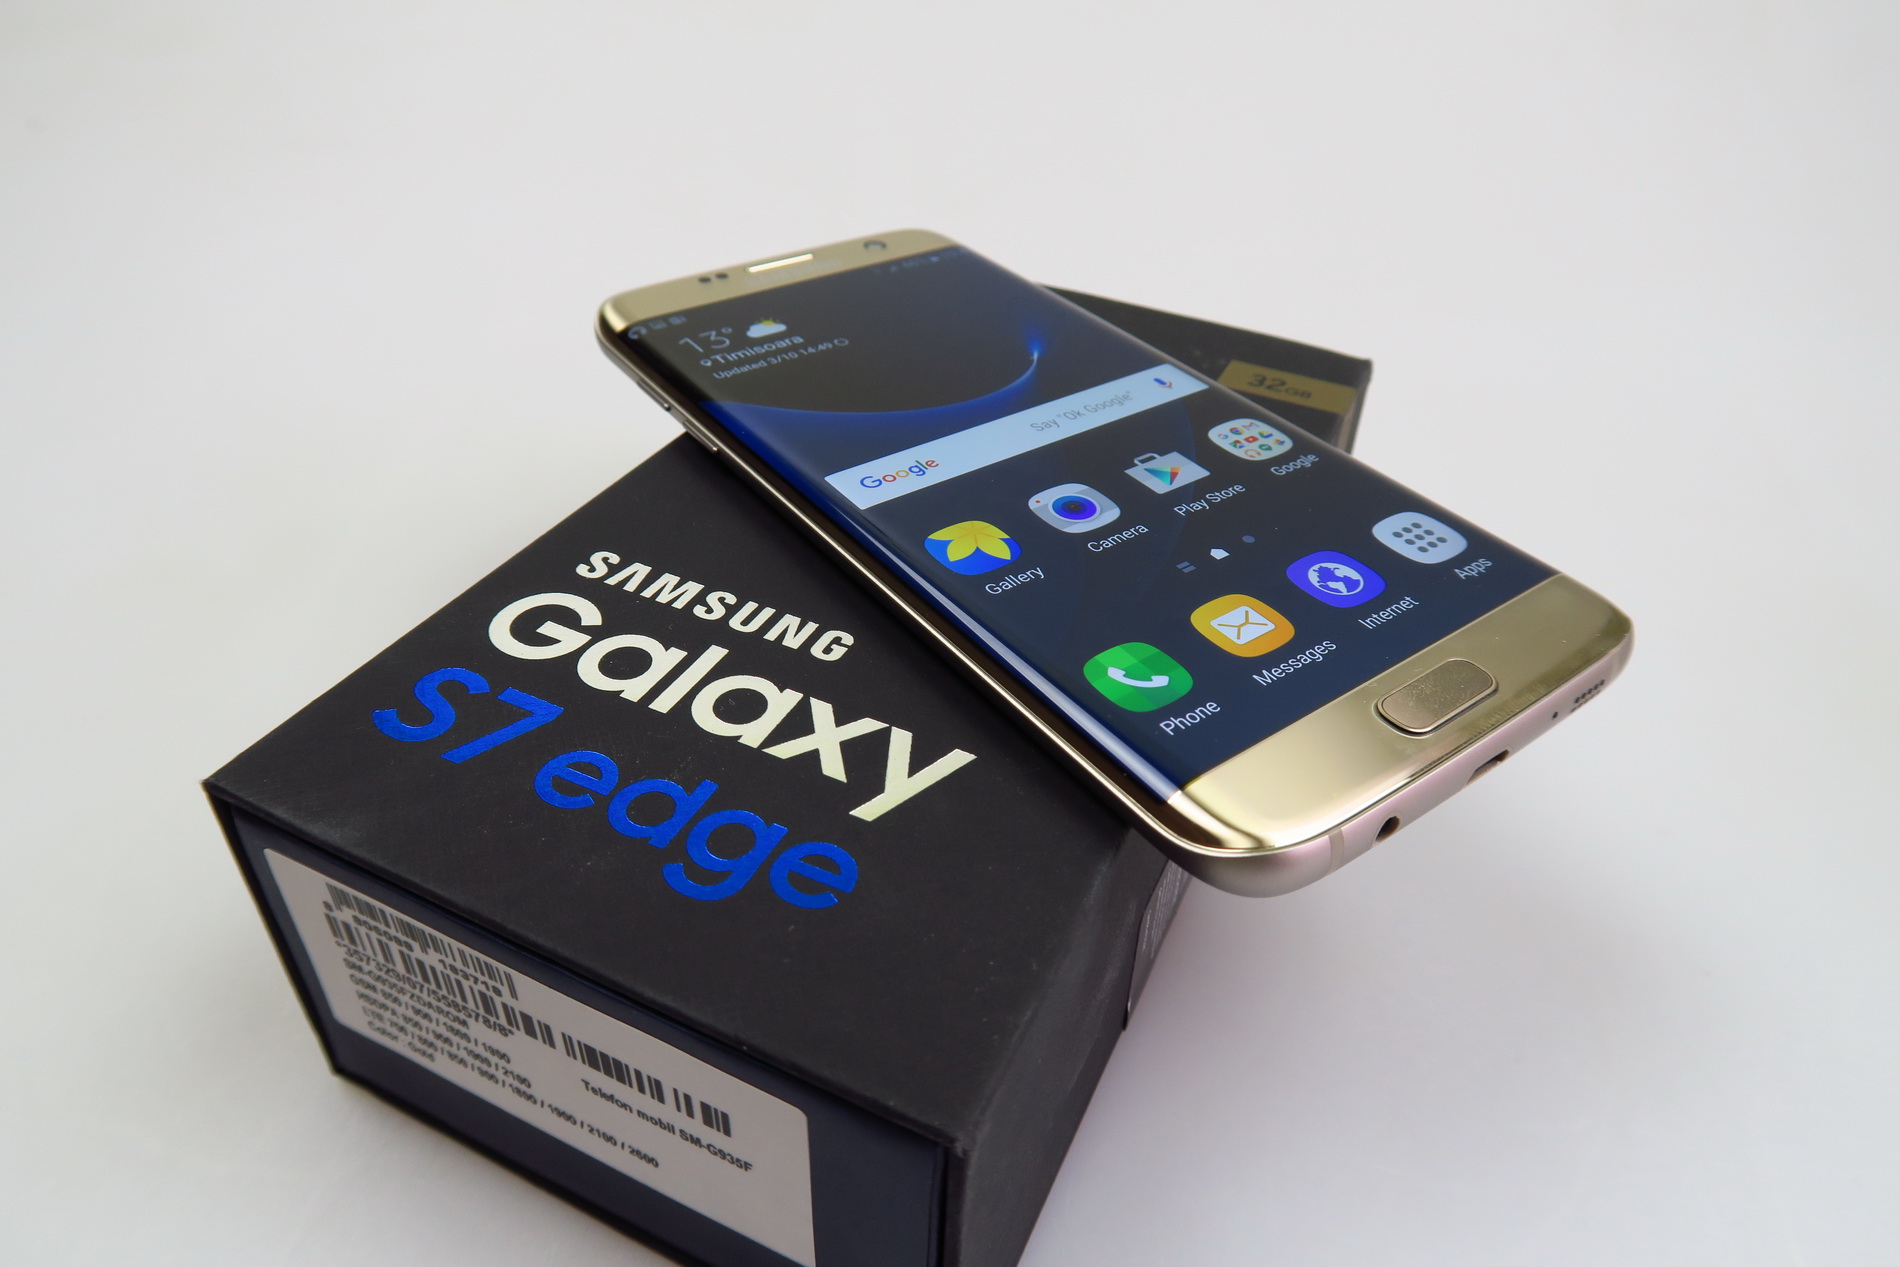 Samsung Galaxy S7 Curviest 2016 Flagship Has Arrived! (Video) | GSMDome.com